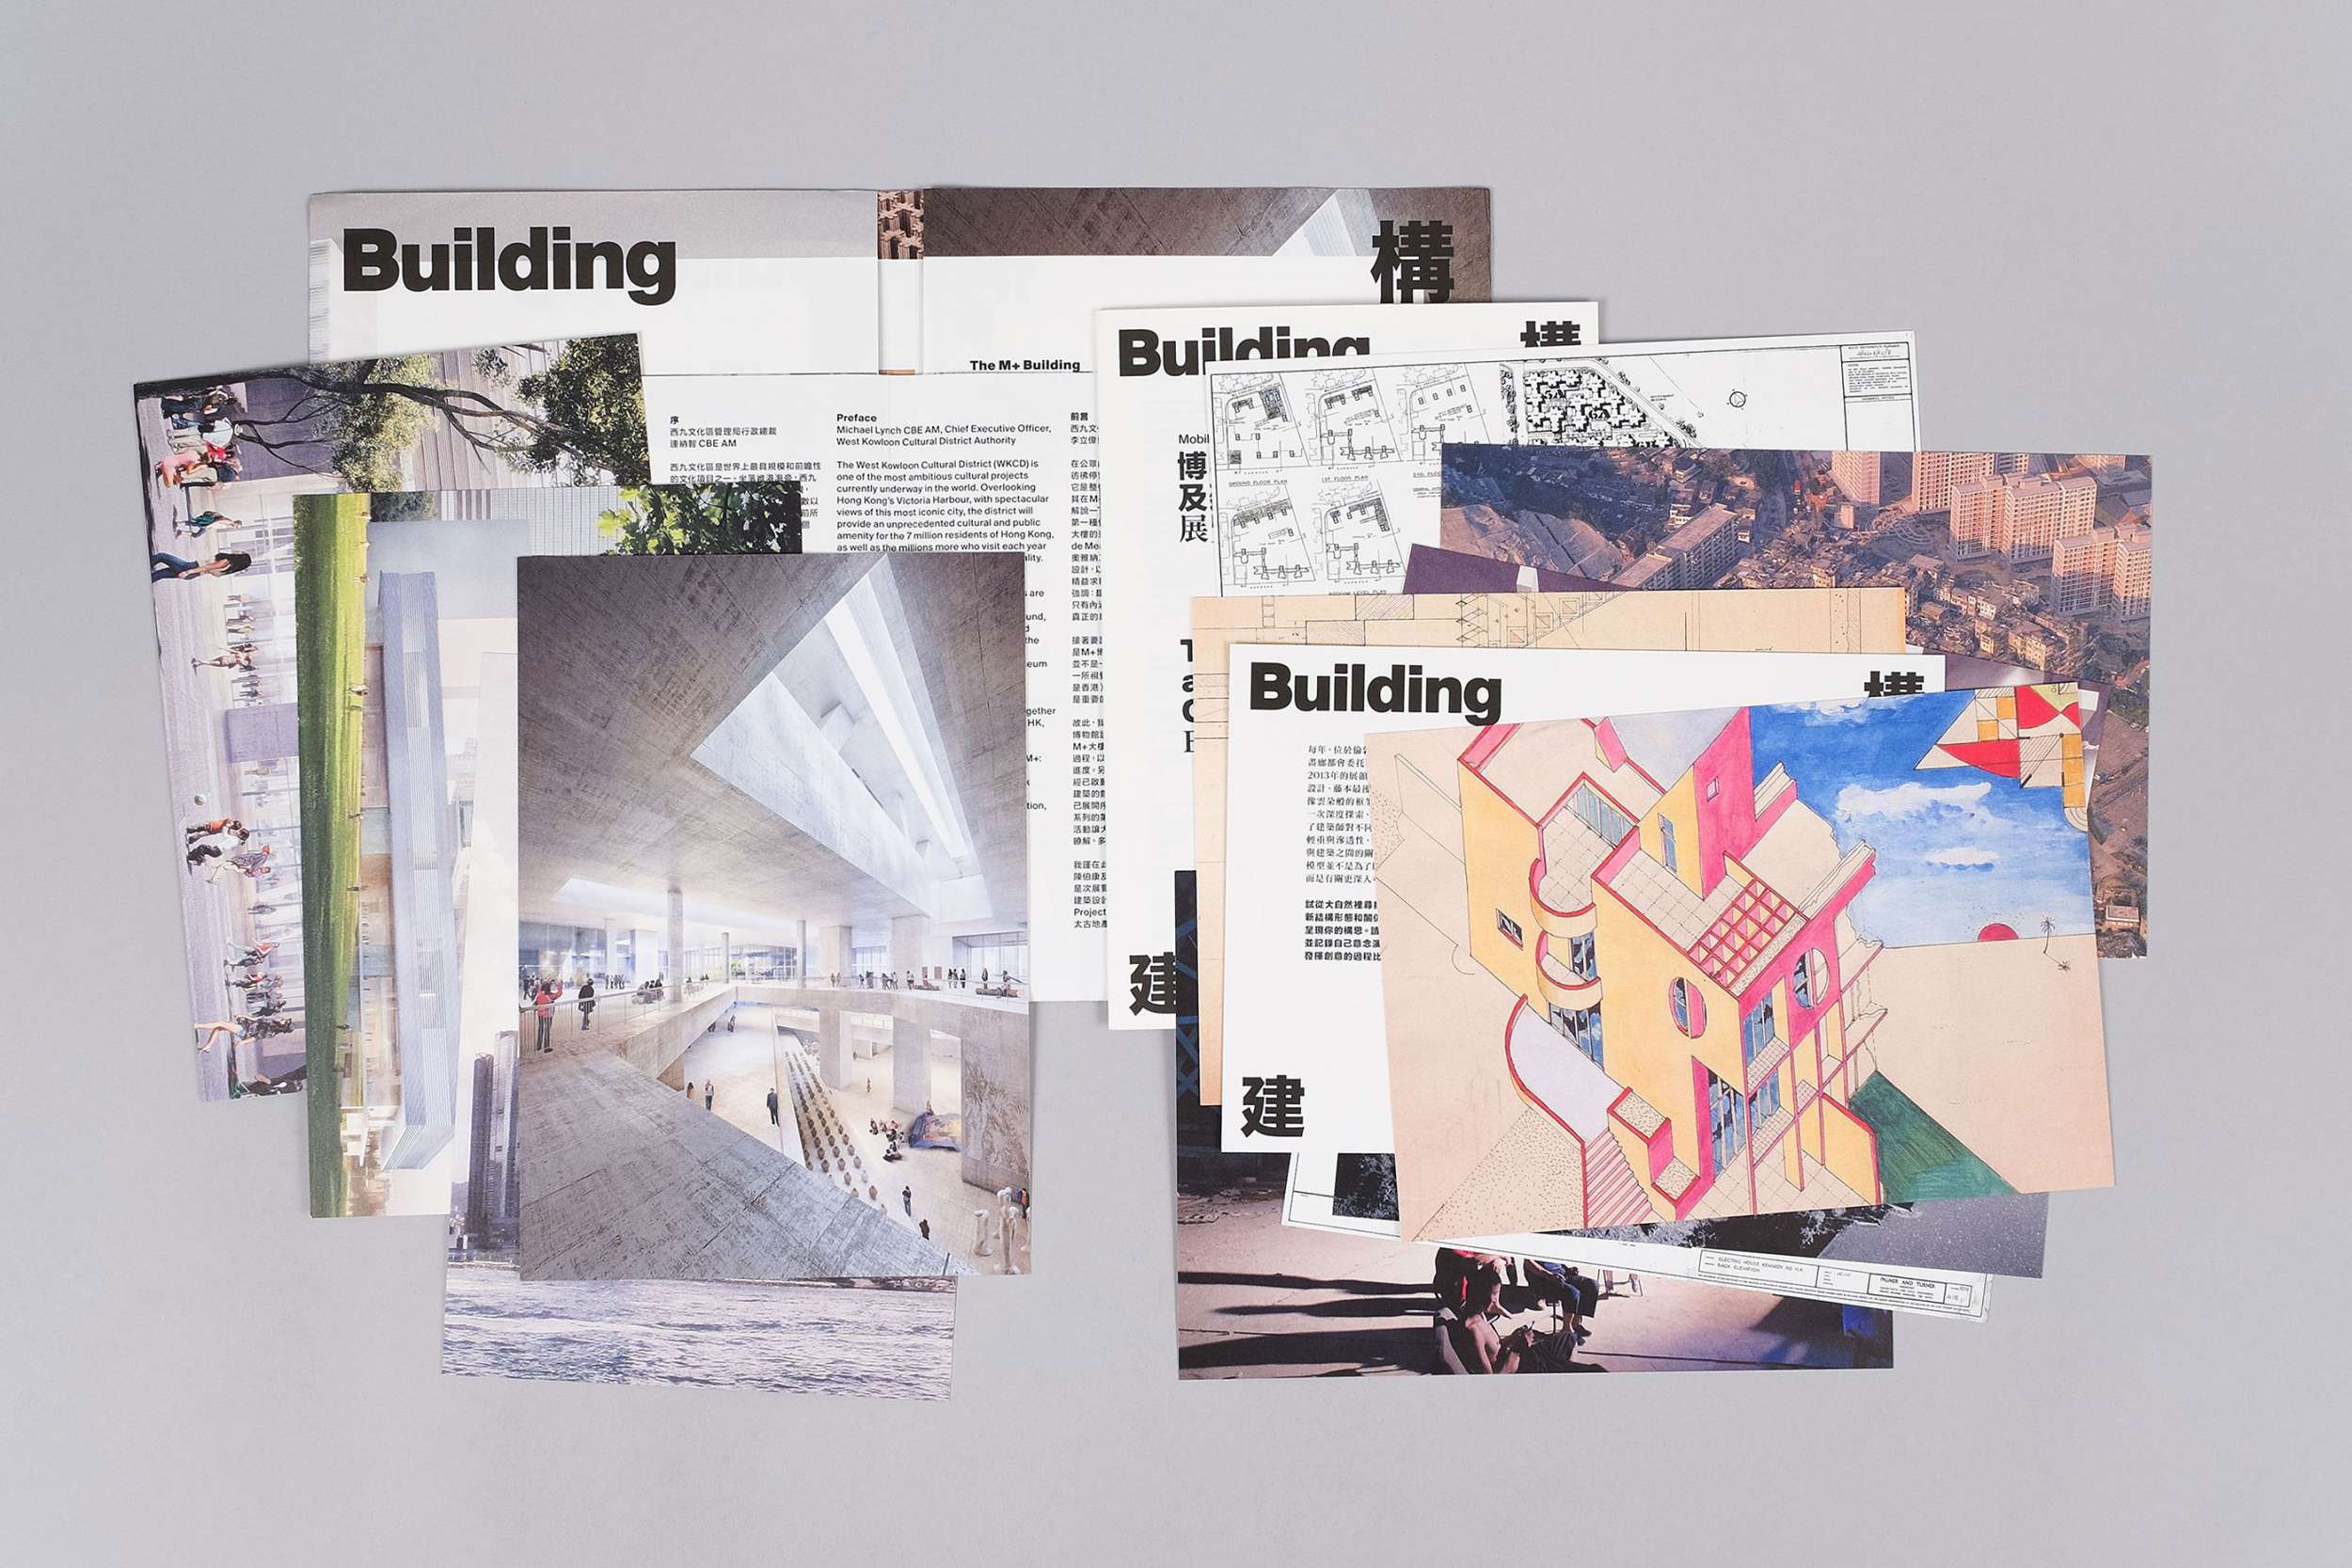 Building M+: The Museum and Architecture Collection identity